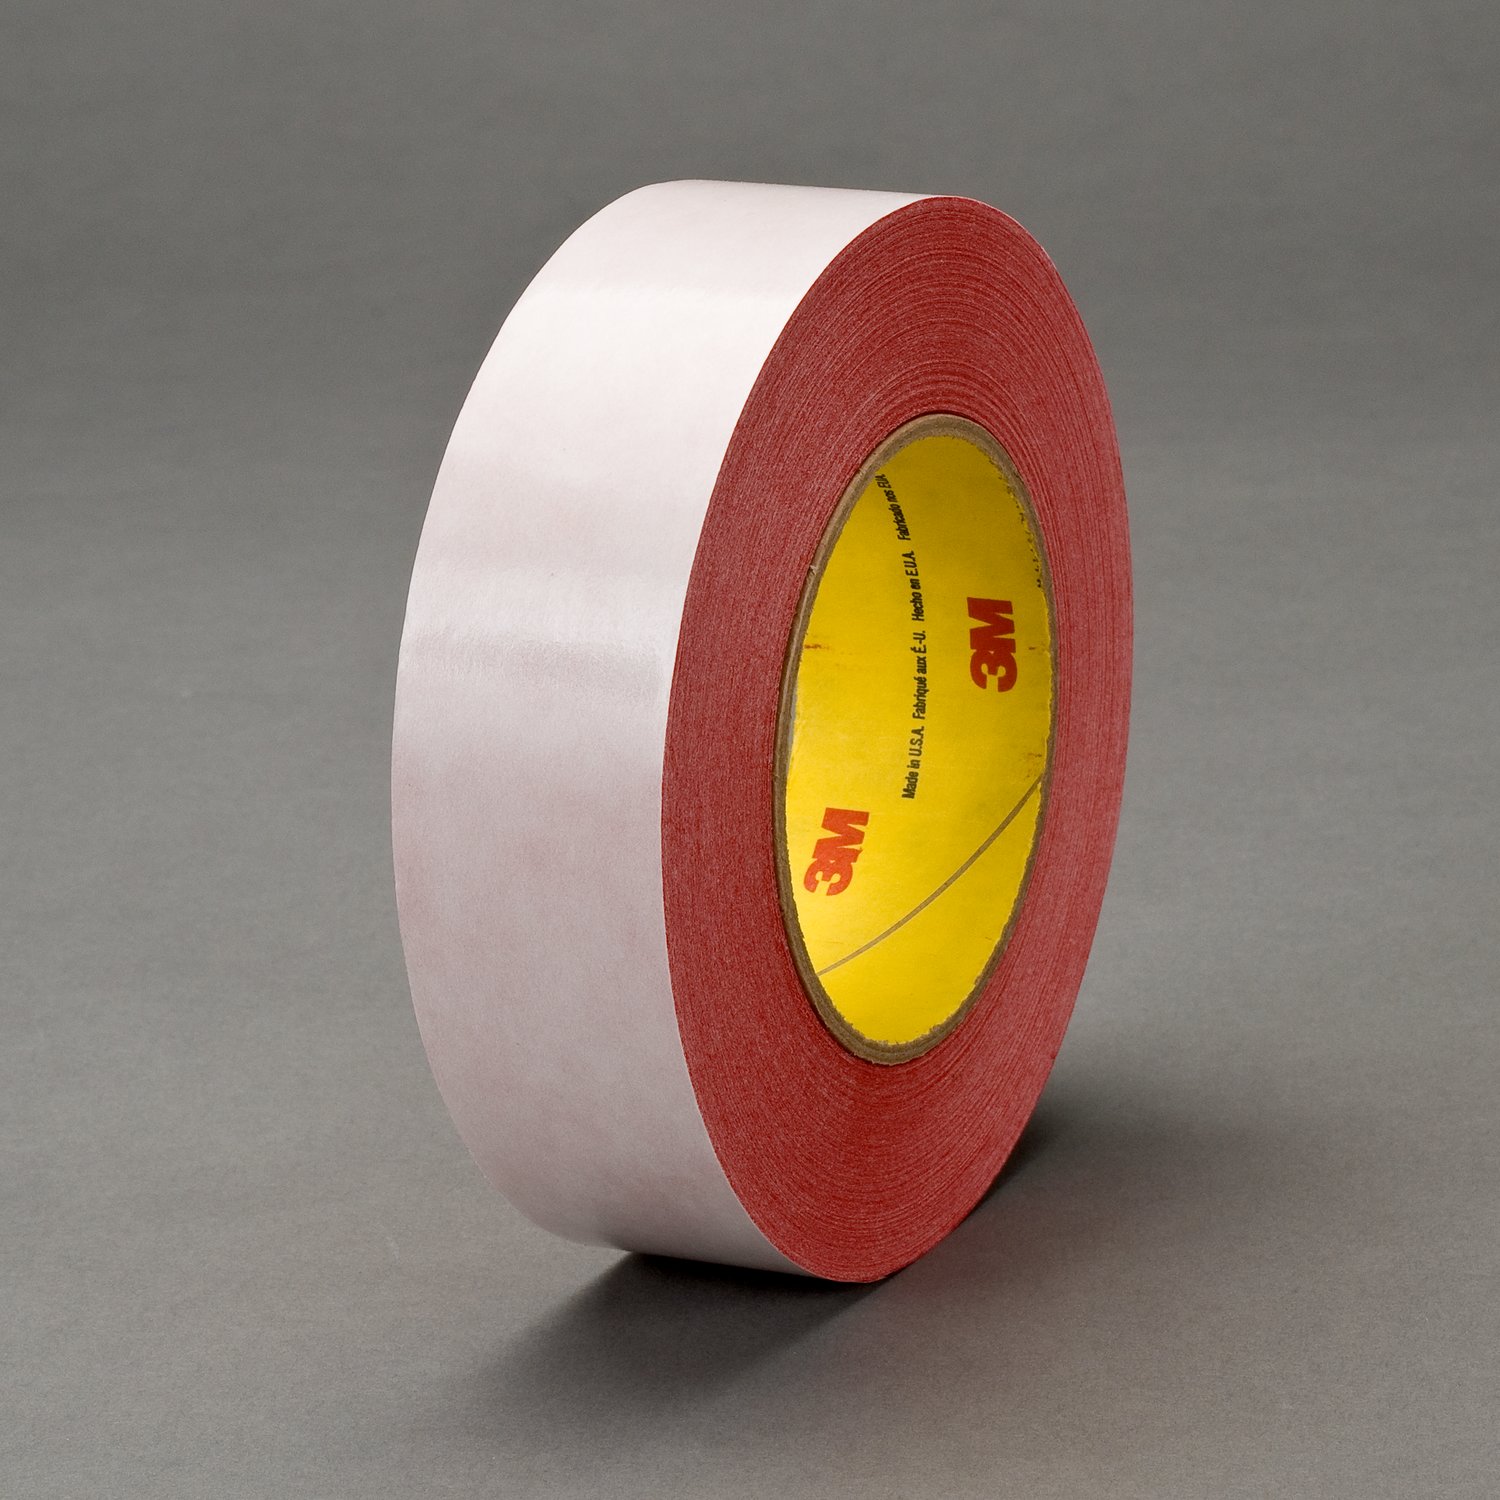 7010334744 - 3M Double Coated Tape 9737R, Red, 60 in x 250 yd, 3.5 mil, 9 rolls per
pallet (1 roll per case)